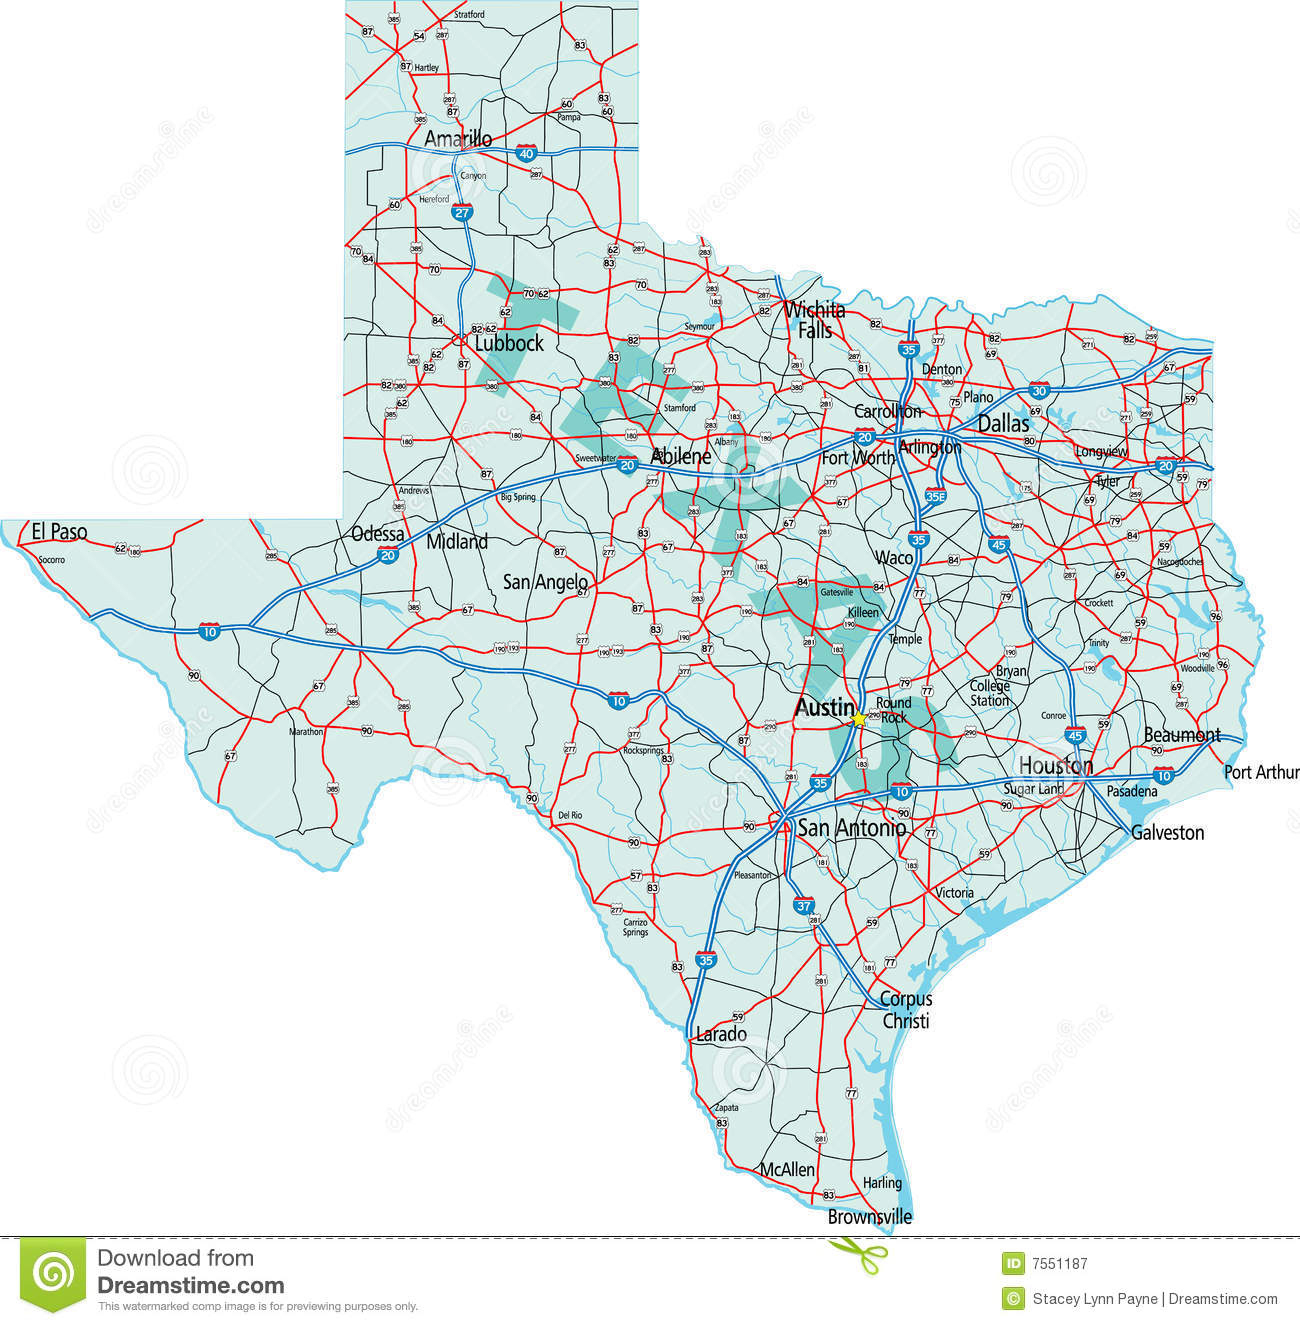 Texas Interstate Map Stock Vector. Illustration Of Dallas - 7551187 - Free Texas Map